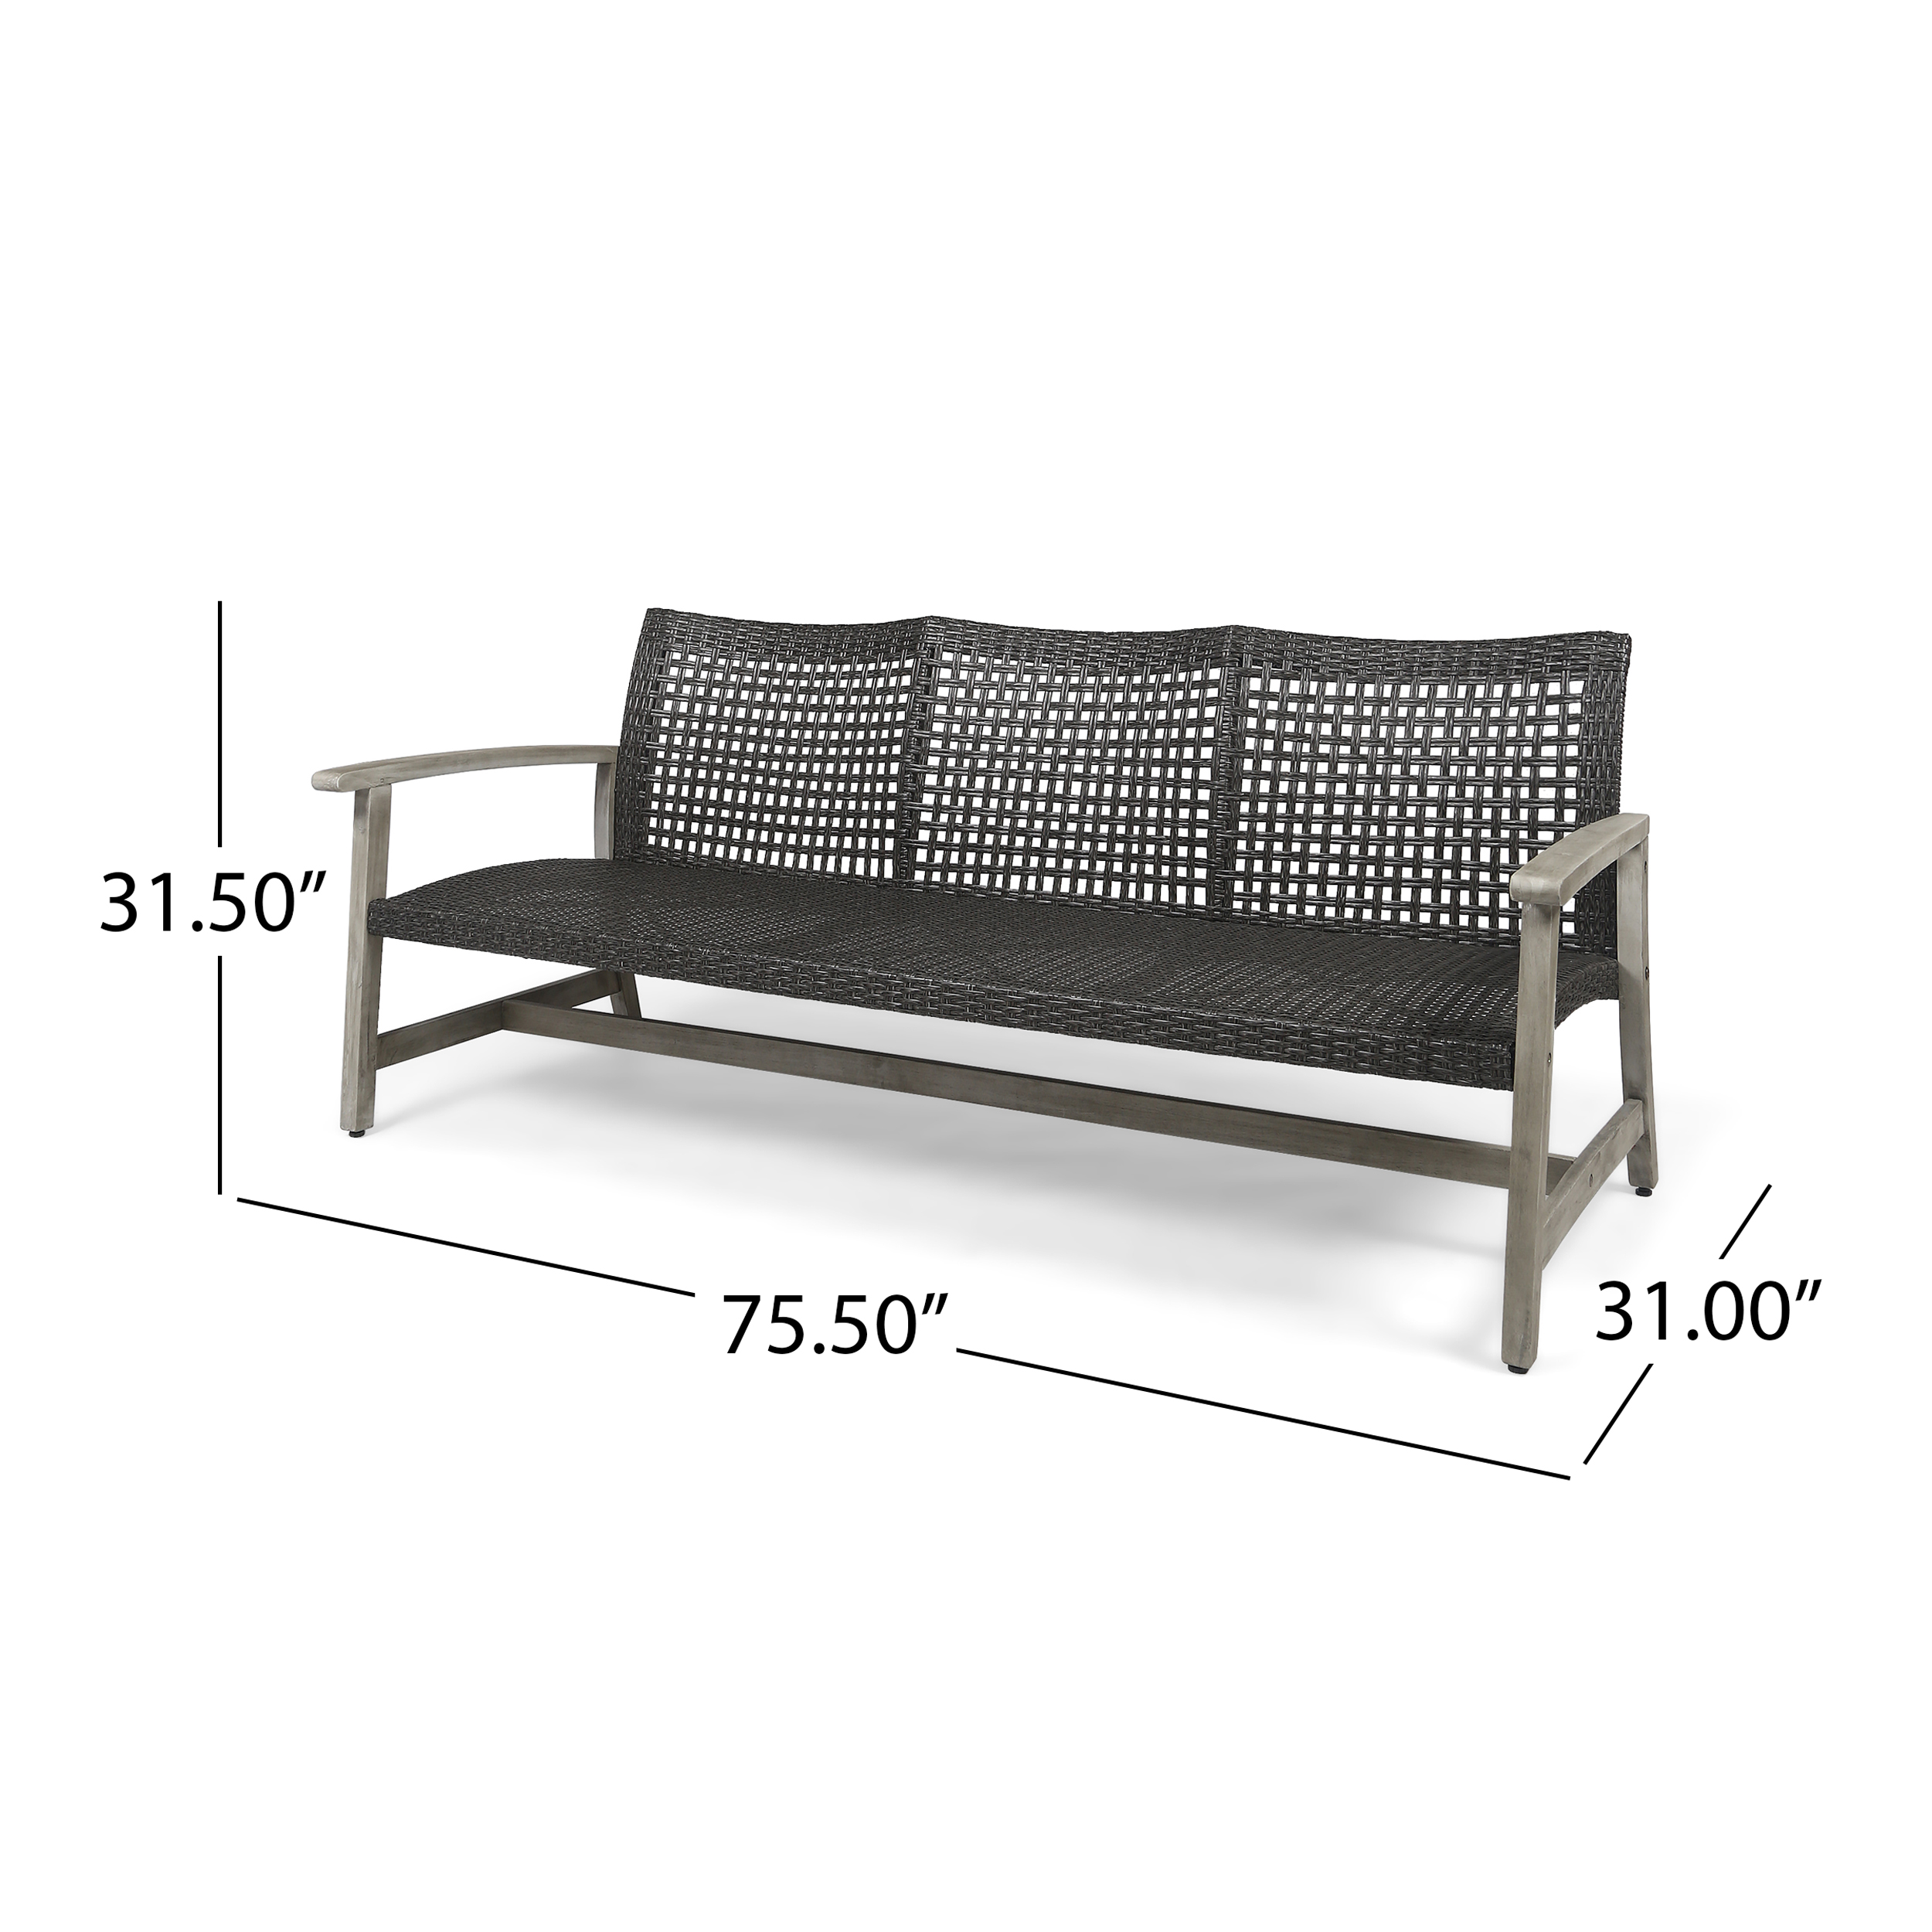 Marcia Outdoor Wood and Wicker Sofa, Light Gray Finish with Mix Black Wicker - image 5 of 6